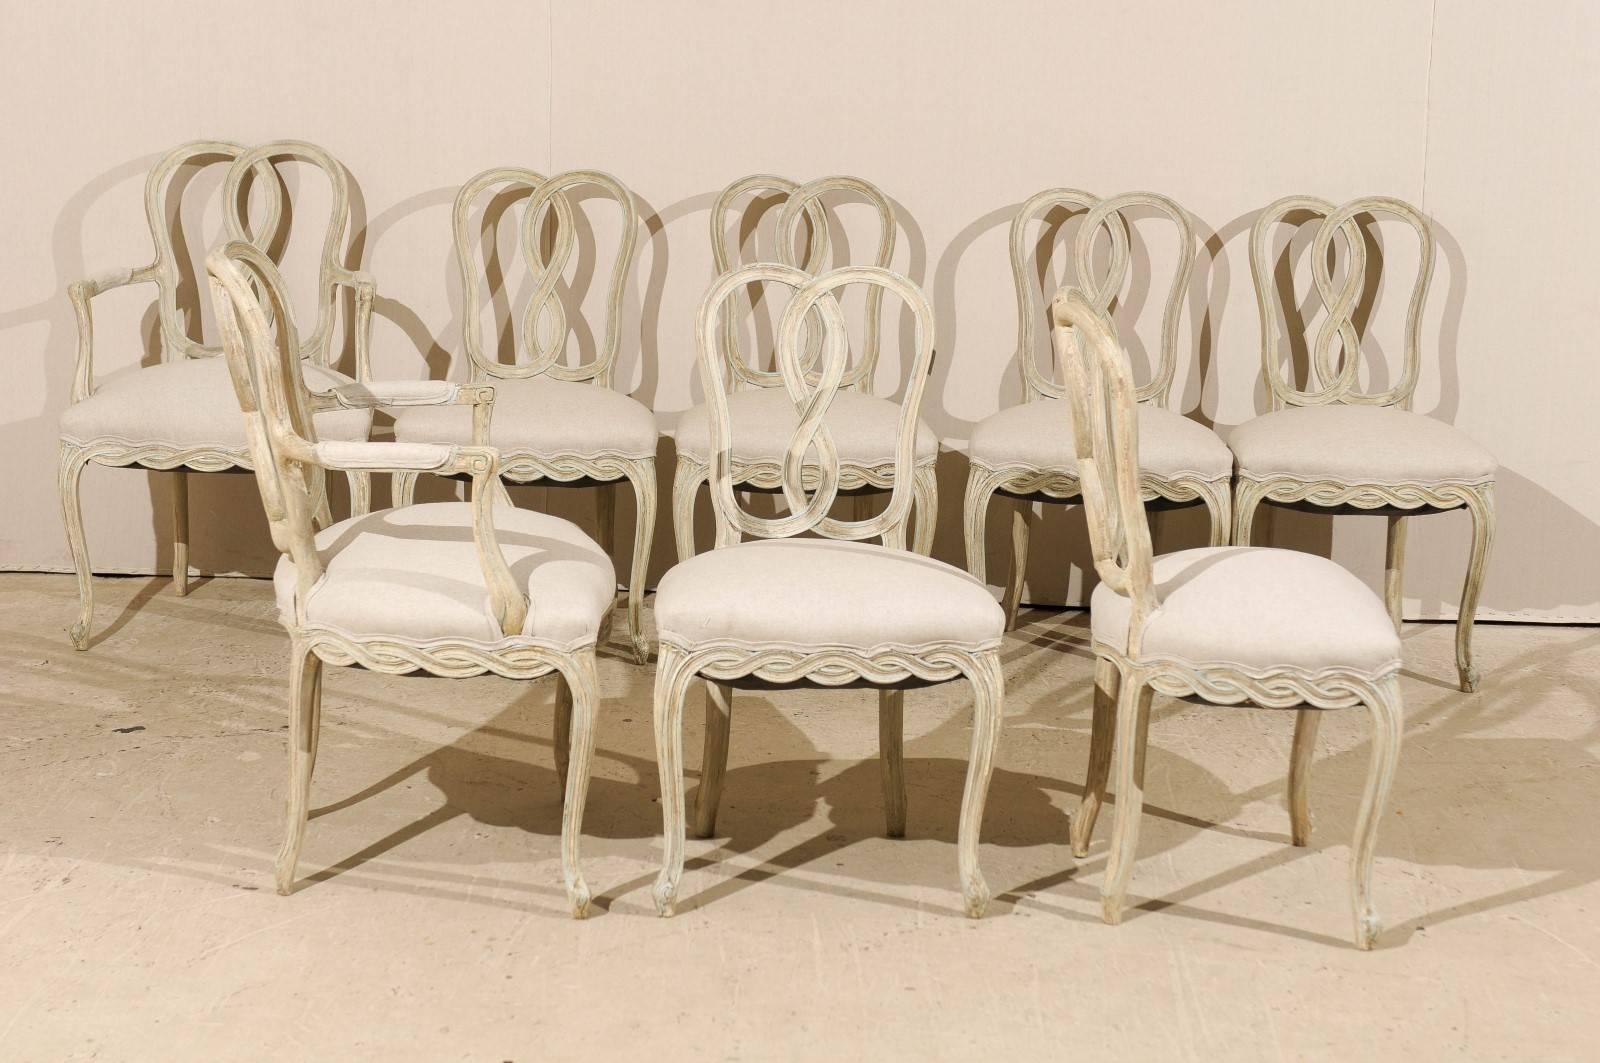 A set of eight Italian Venetian style painted wood chairs. This set of two armchairs and six side chairs feature intertwined ribbon motifs on their backs and skirts. The chairs also have cabriole legs. This set has a grey / cream color with light